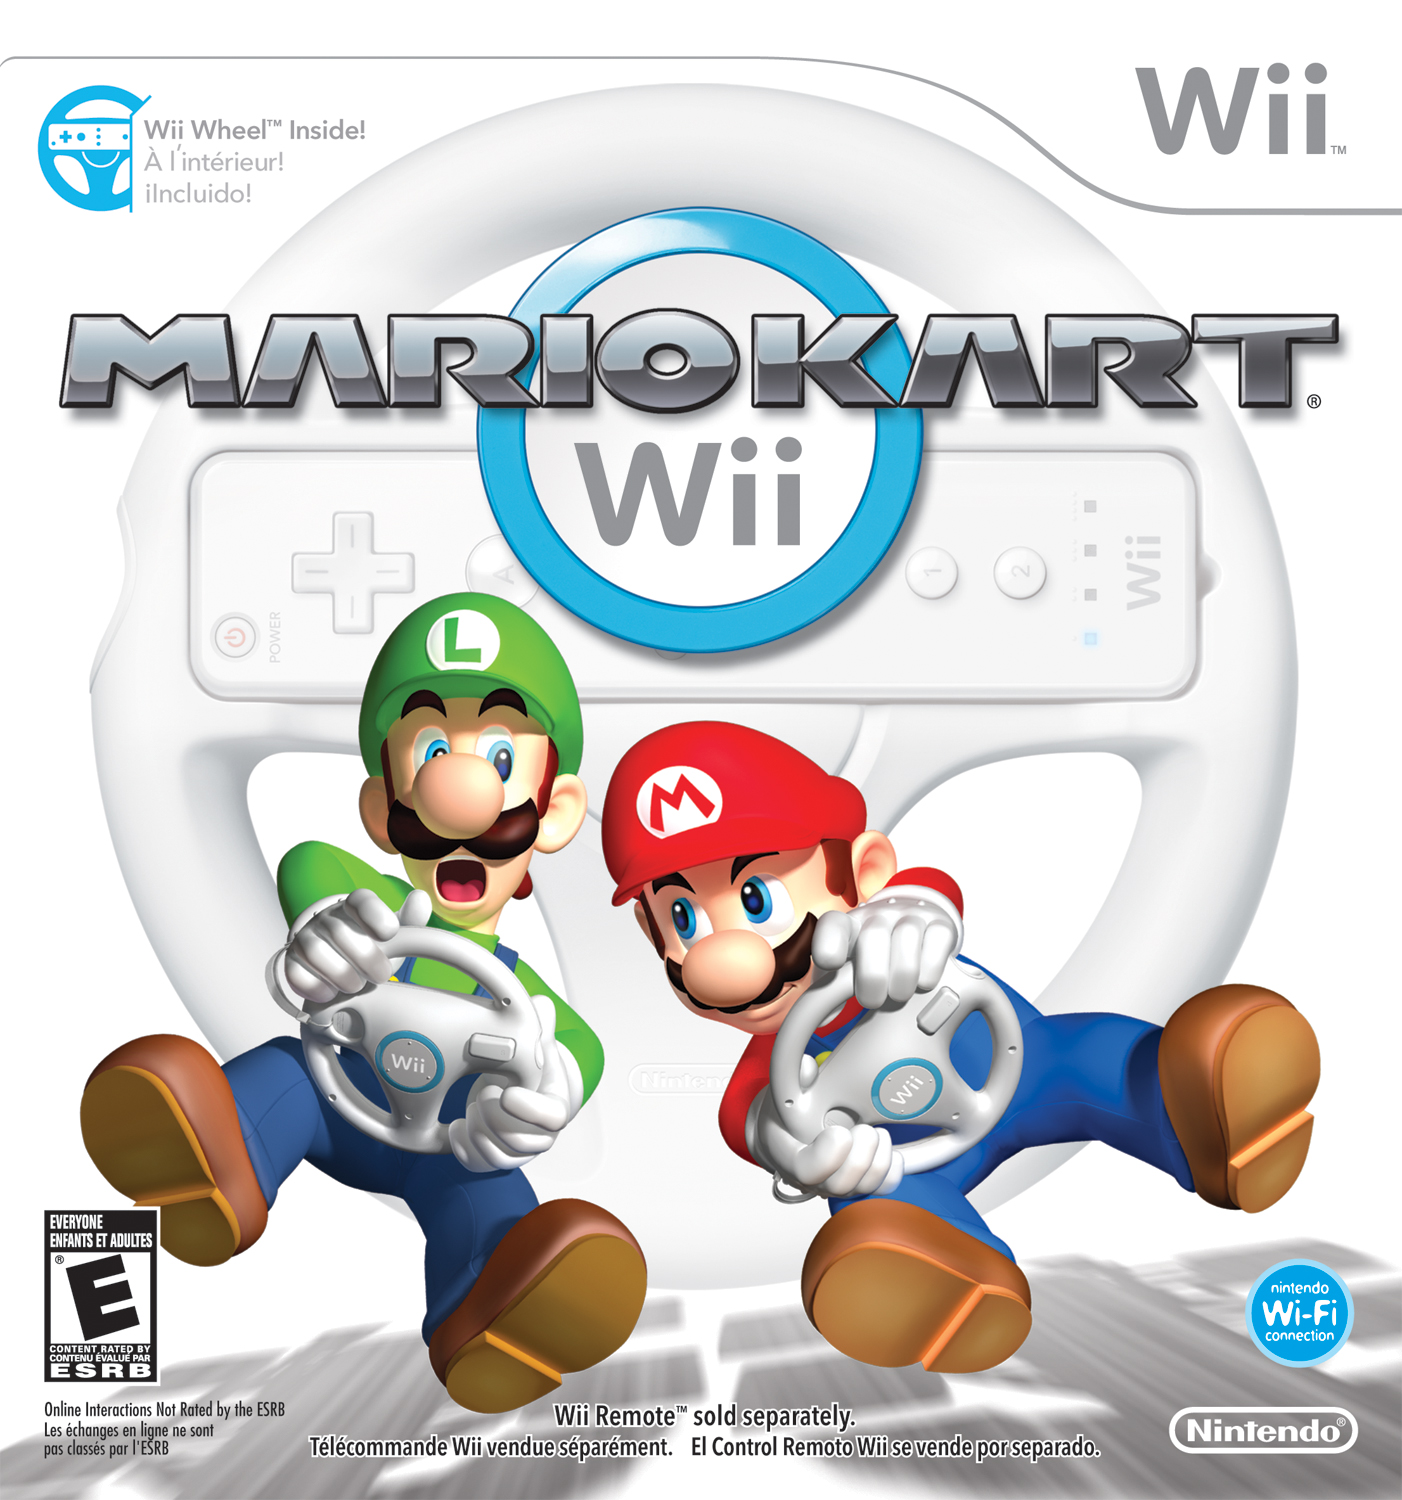 Mario Kart Wii The Nintendo Wiki Wii, Nintendo DS, and all things